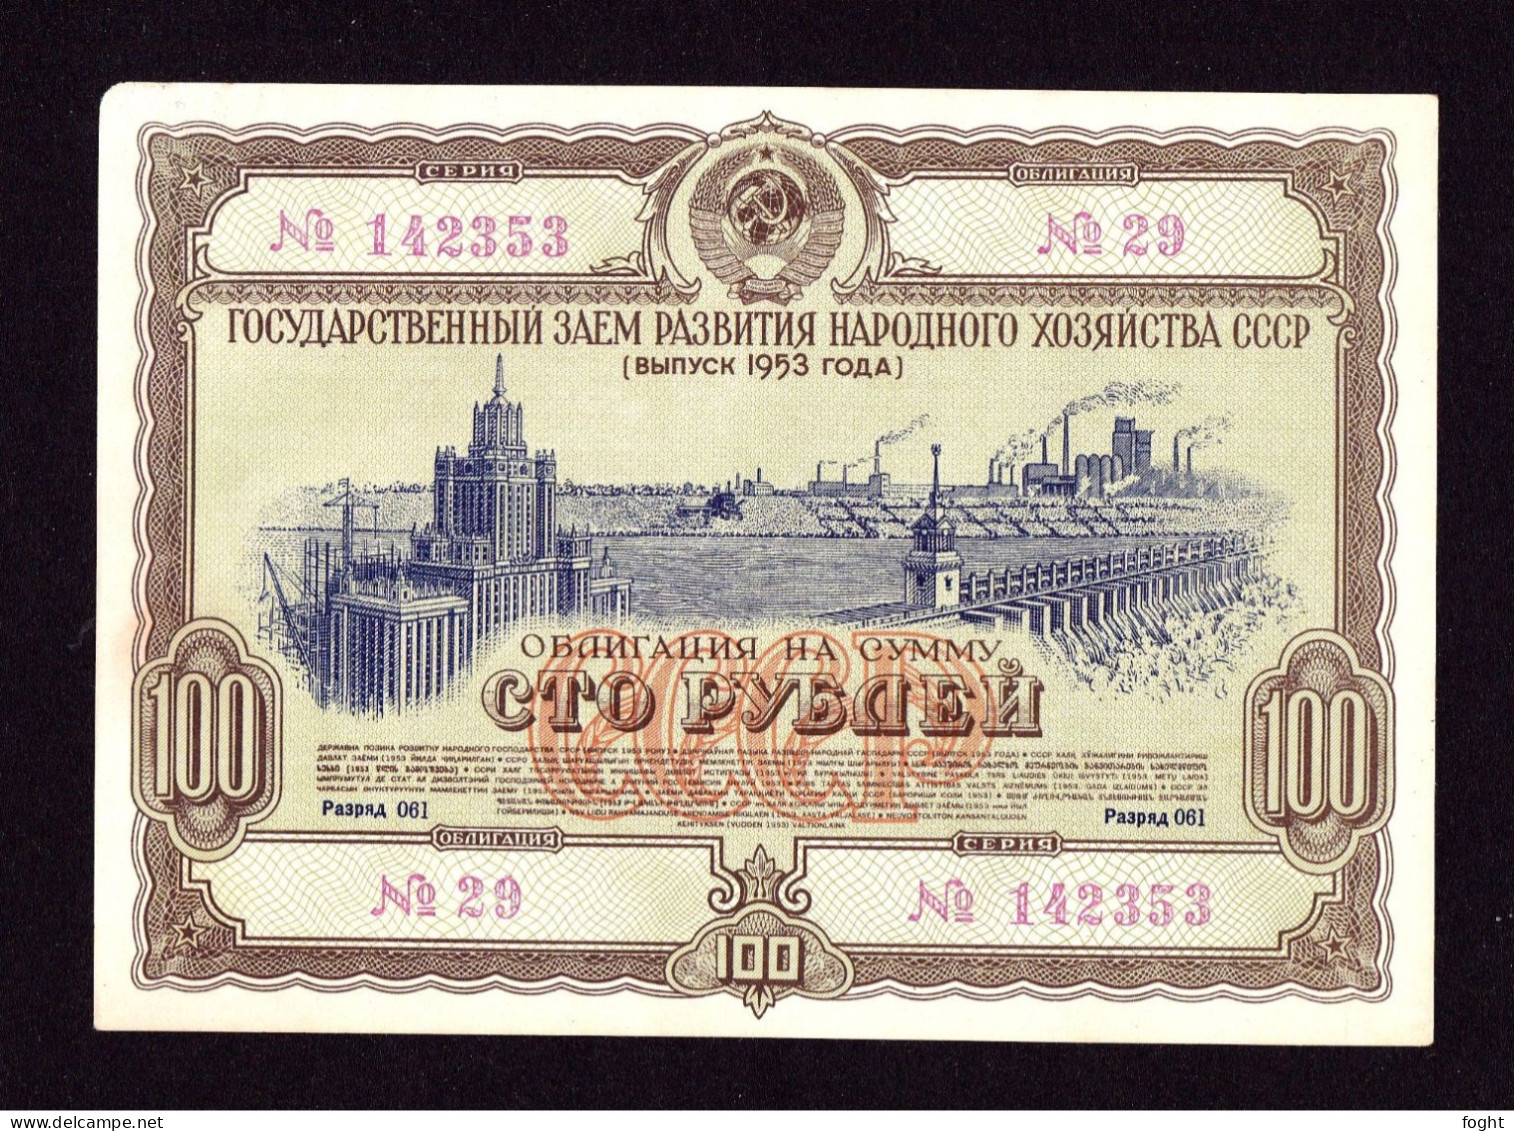 1953 Russia 100 Roubles State Loan Bond - Russia